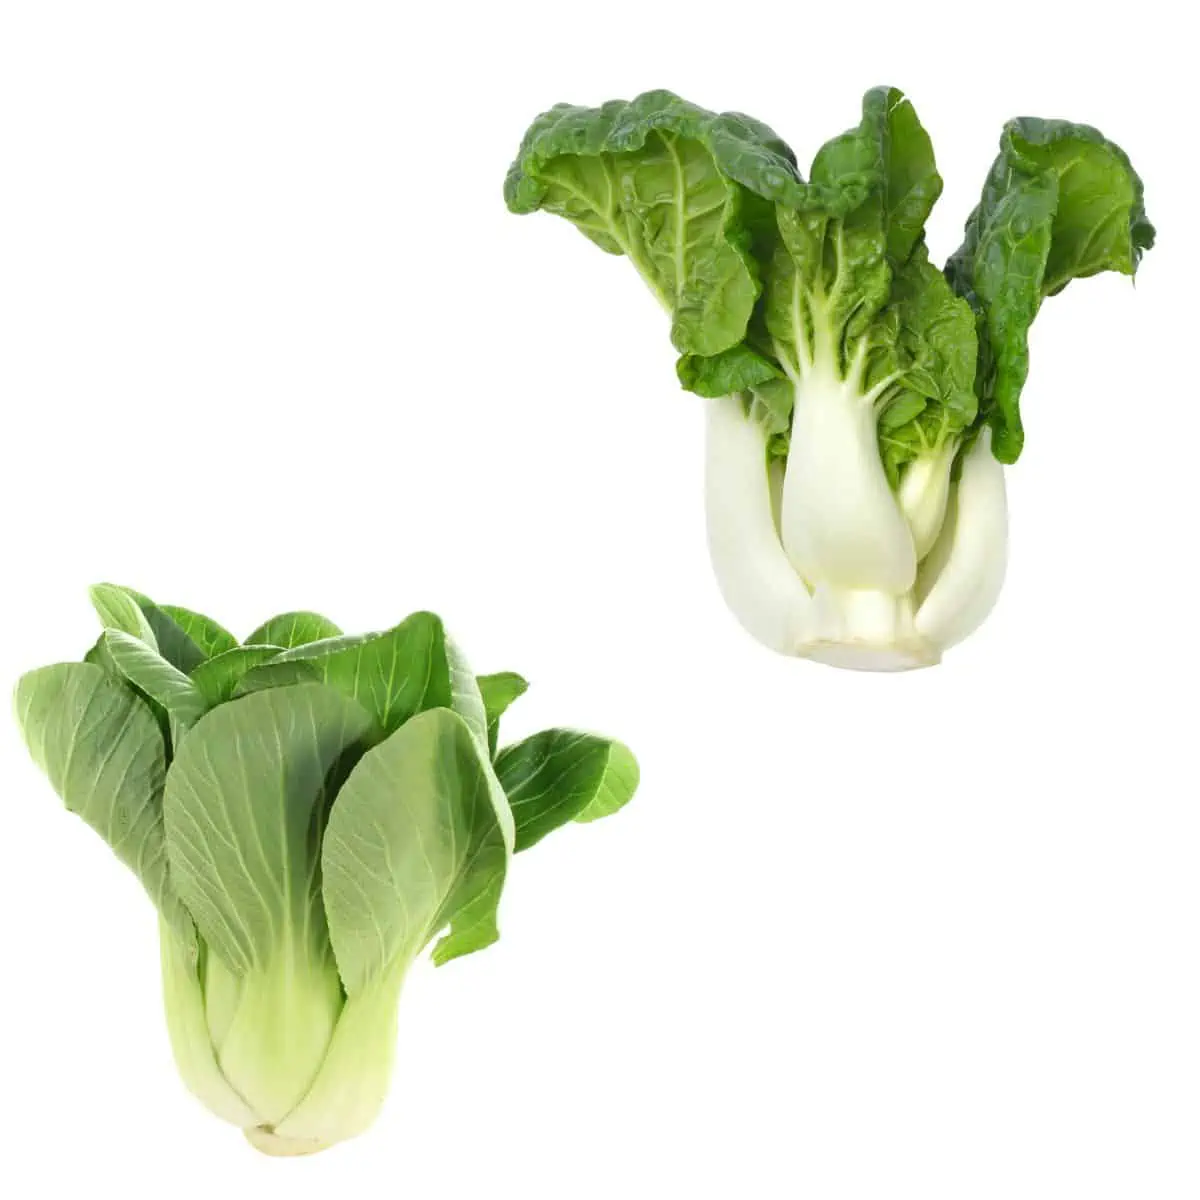 Pak choy and bok choy sitting next to each other.